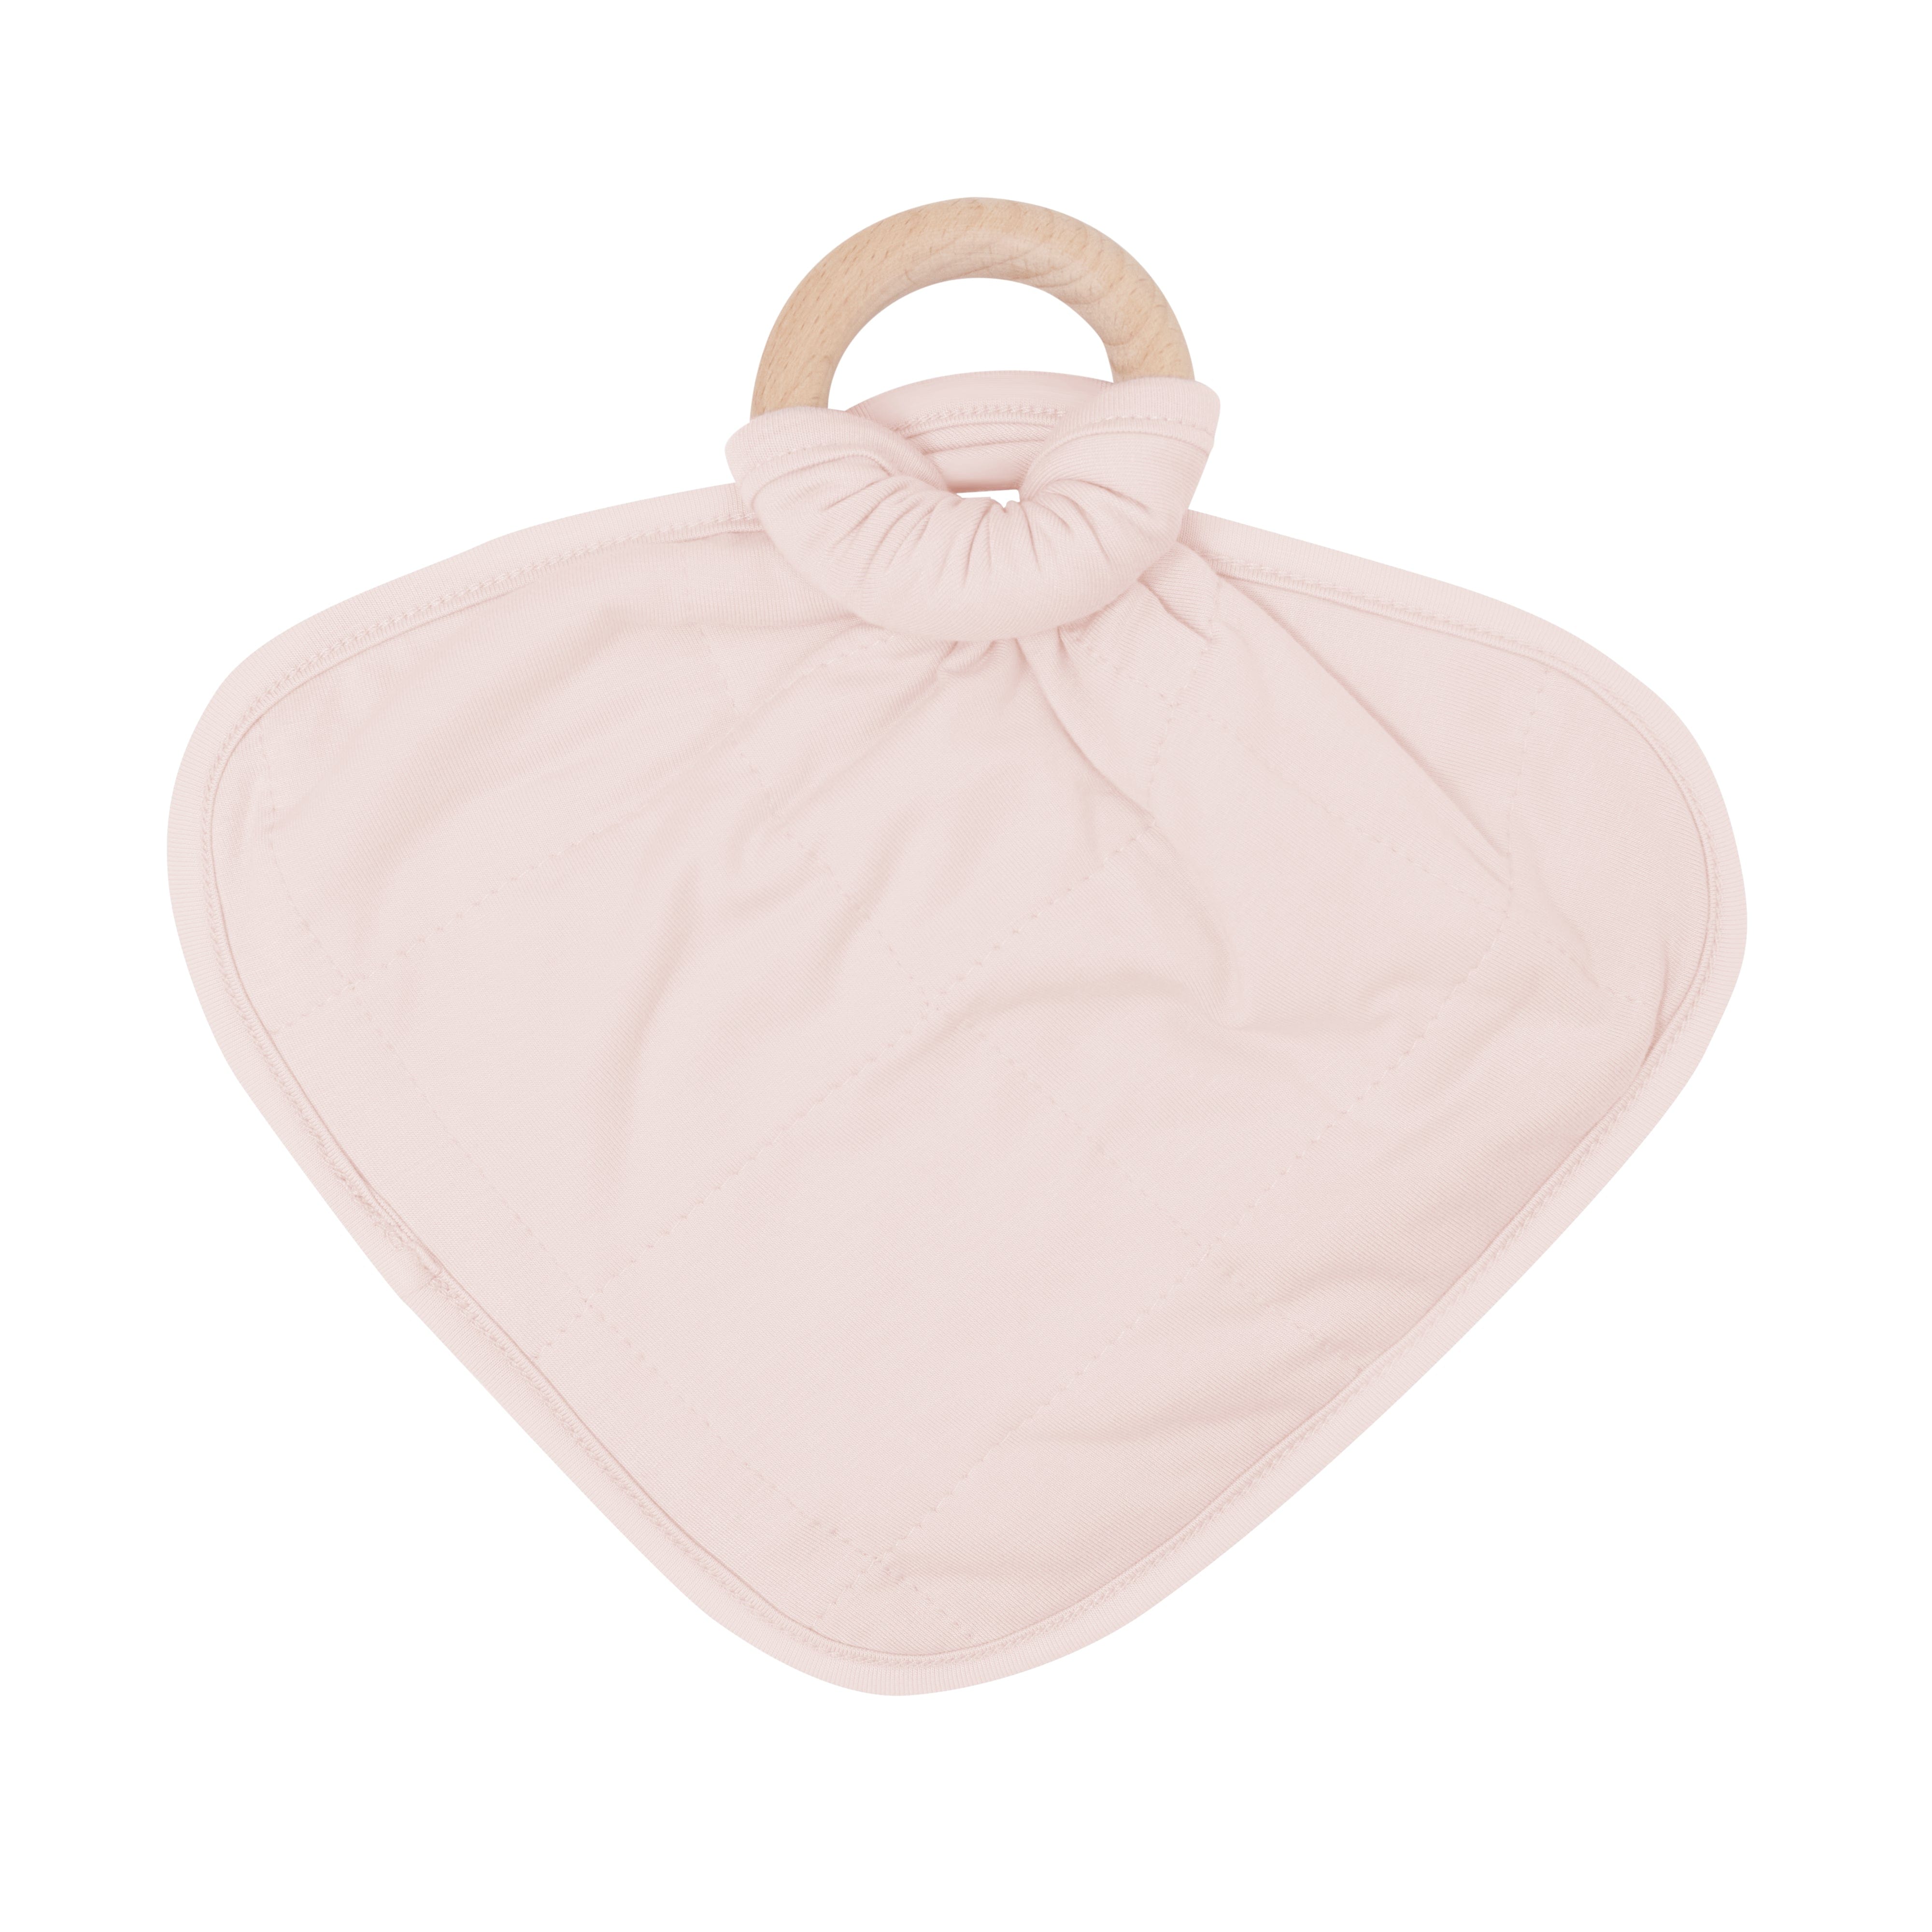 Kyte BABY Lovey Blush / Infant Lovey in Blush with Removable Wooden Teething Ring